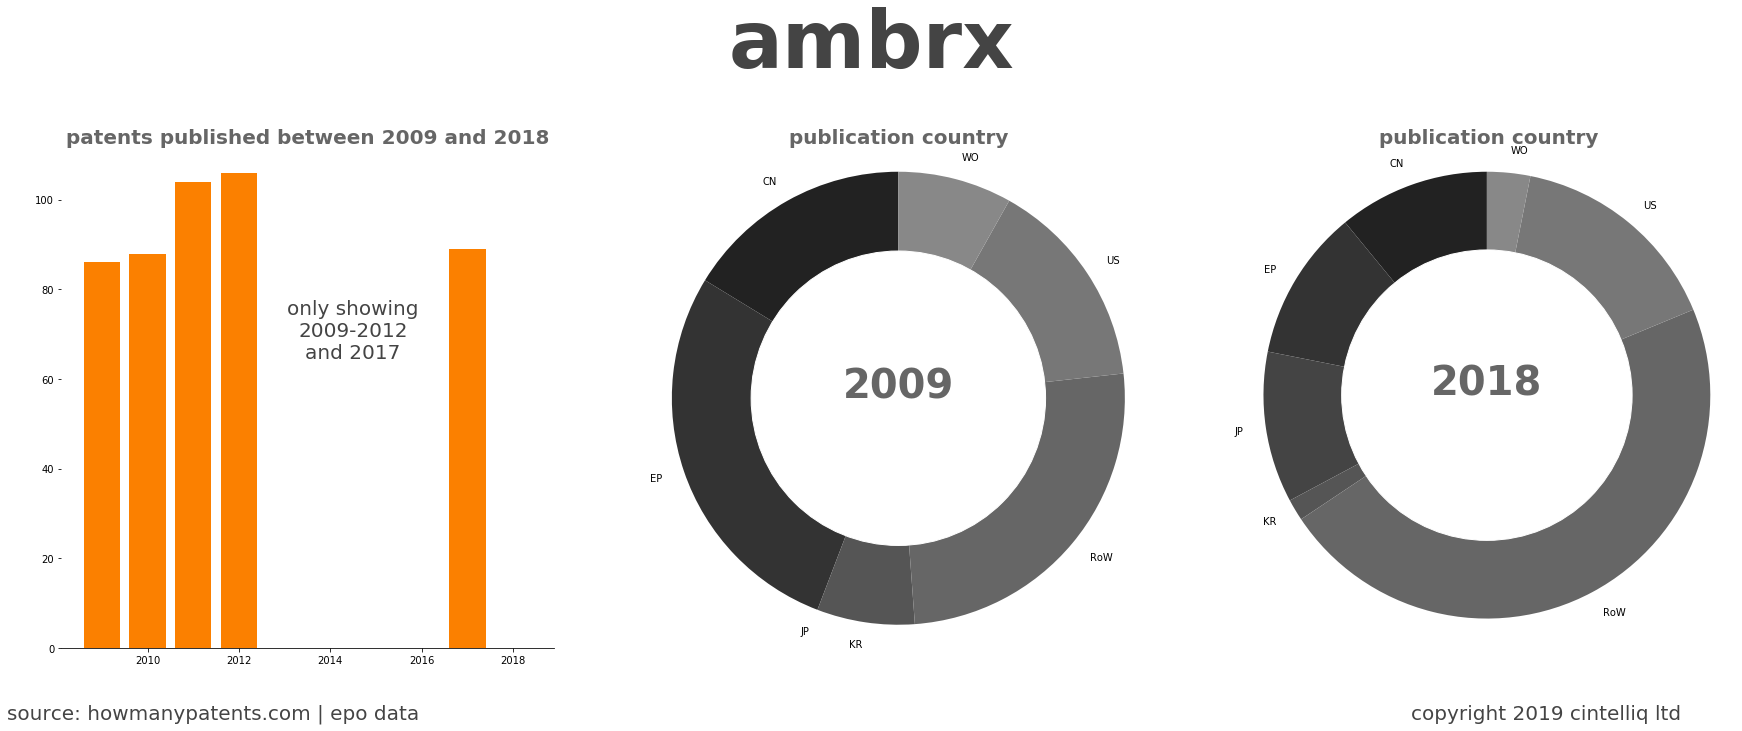 summary of patents for Ambrx